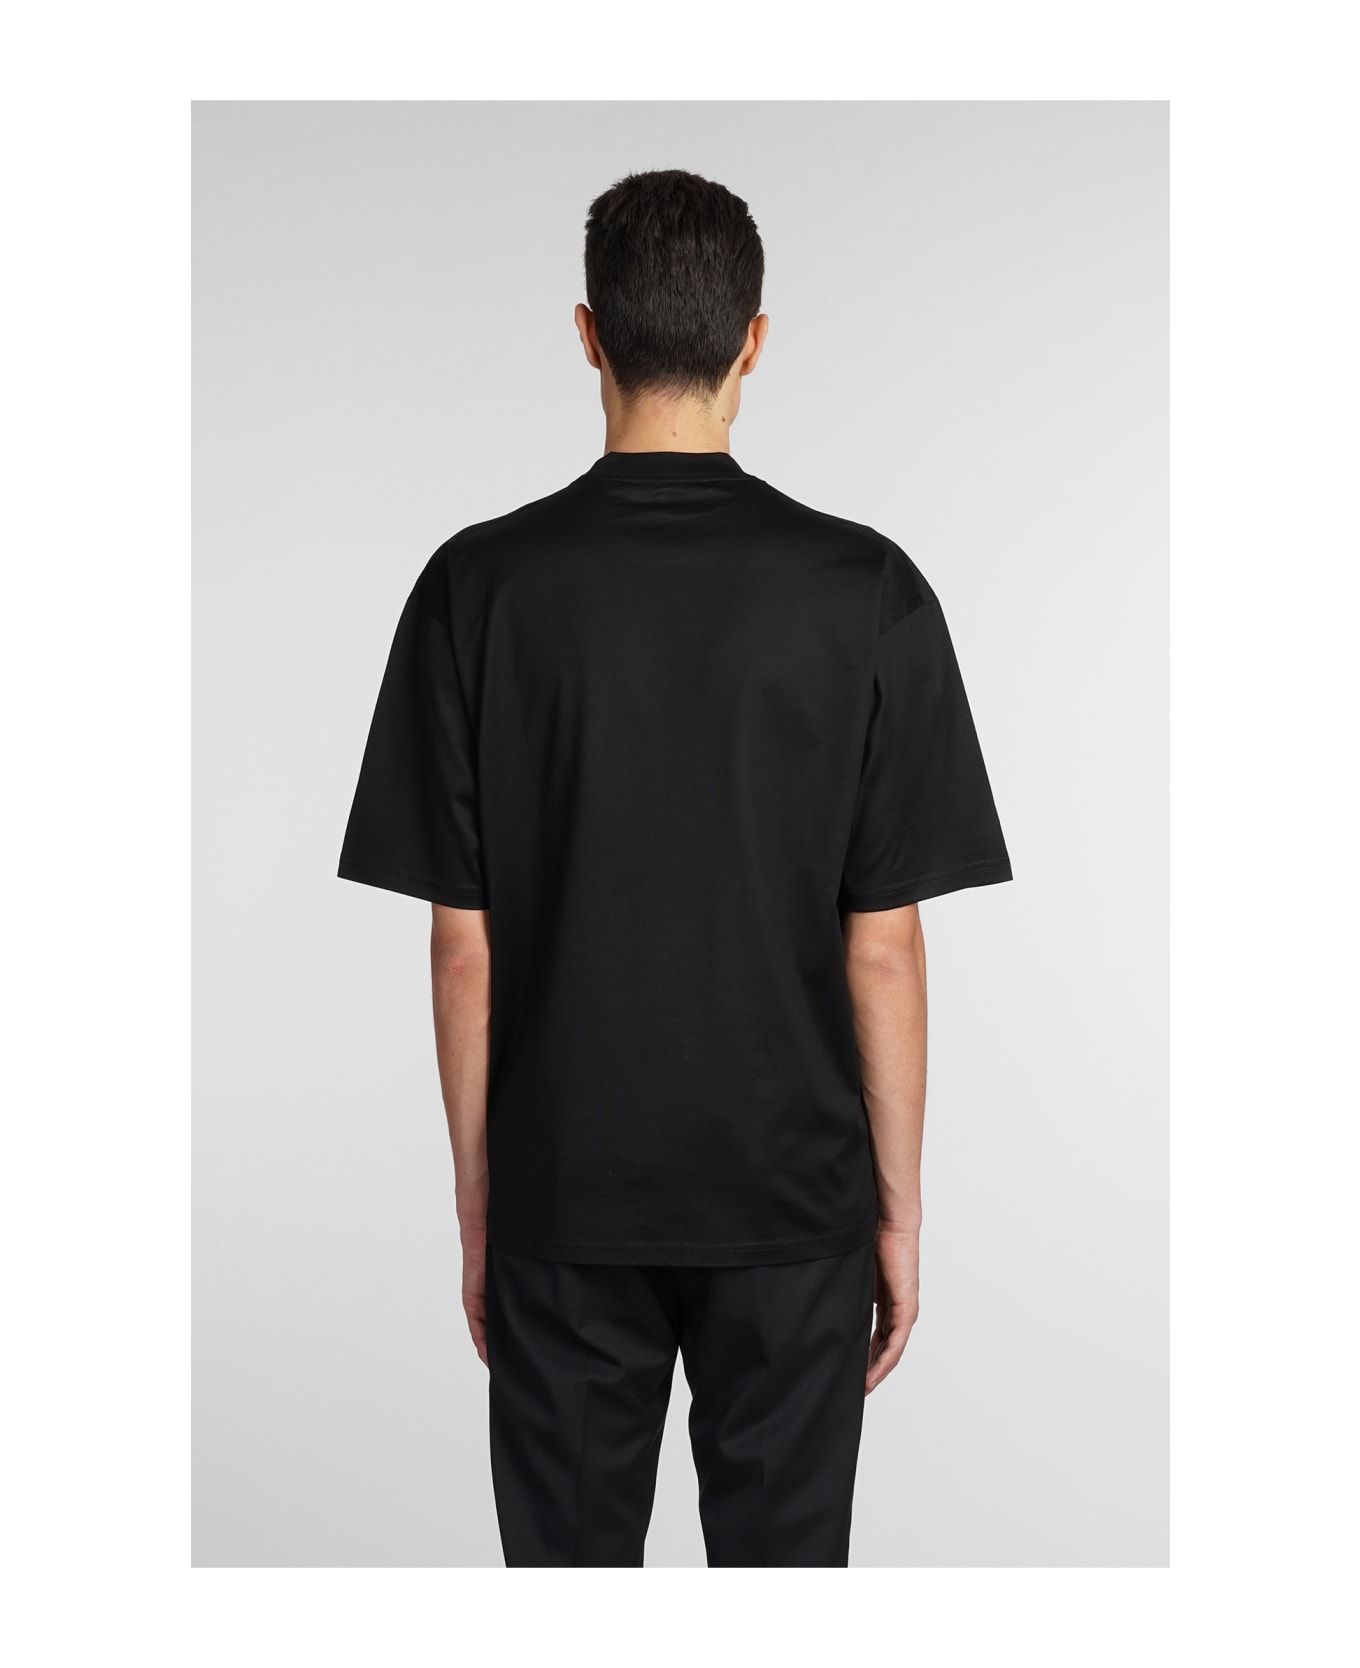 Low Brand T-shirt In Black Cotton シャツ